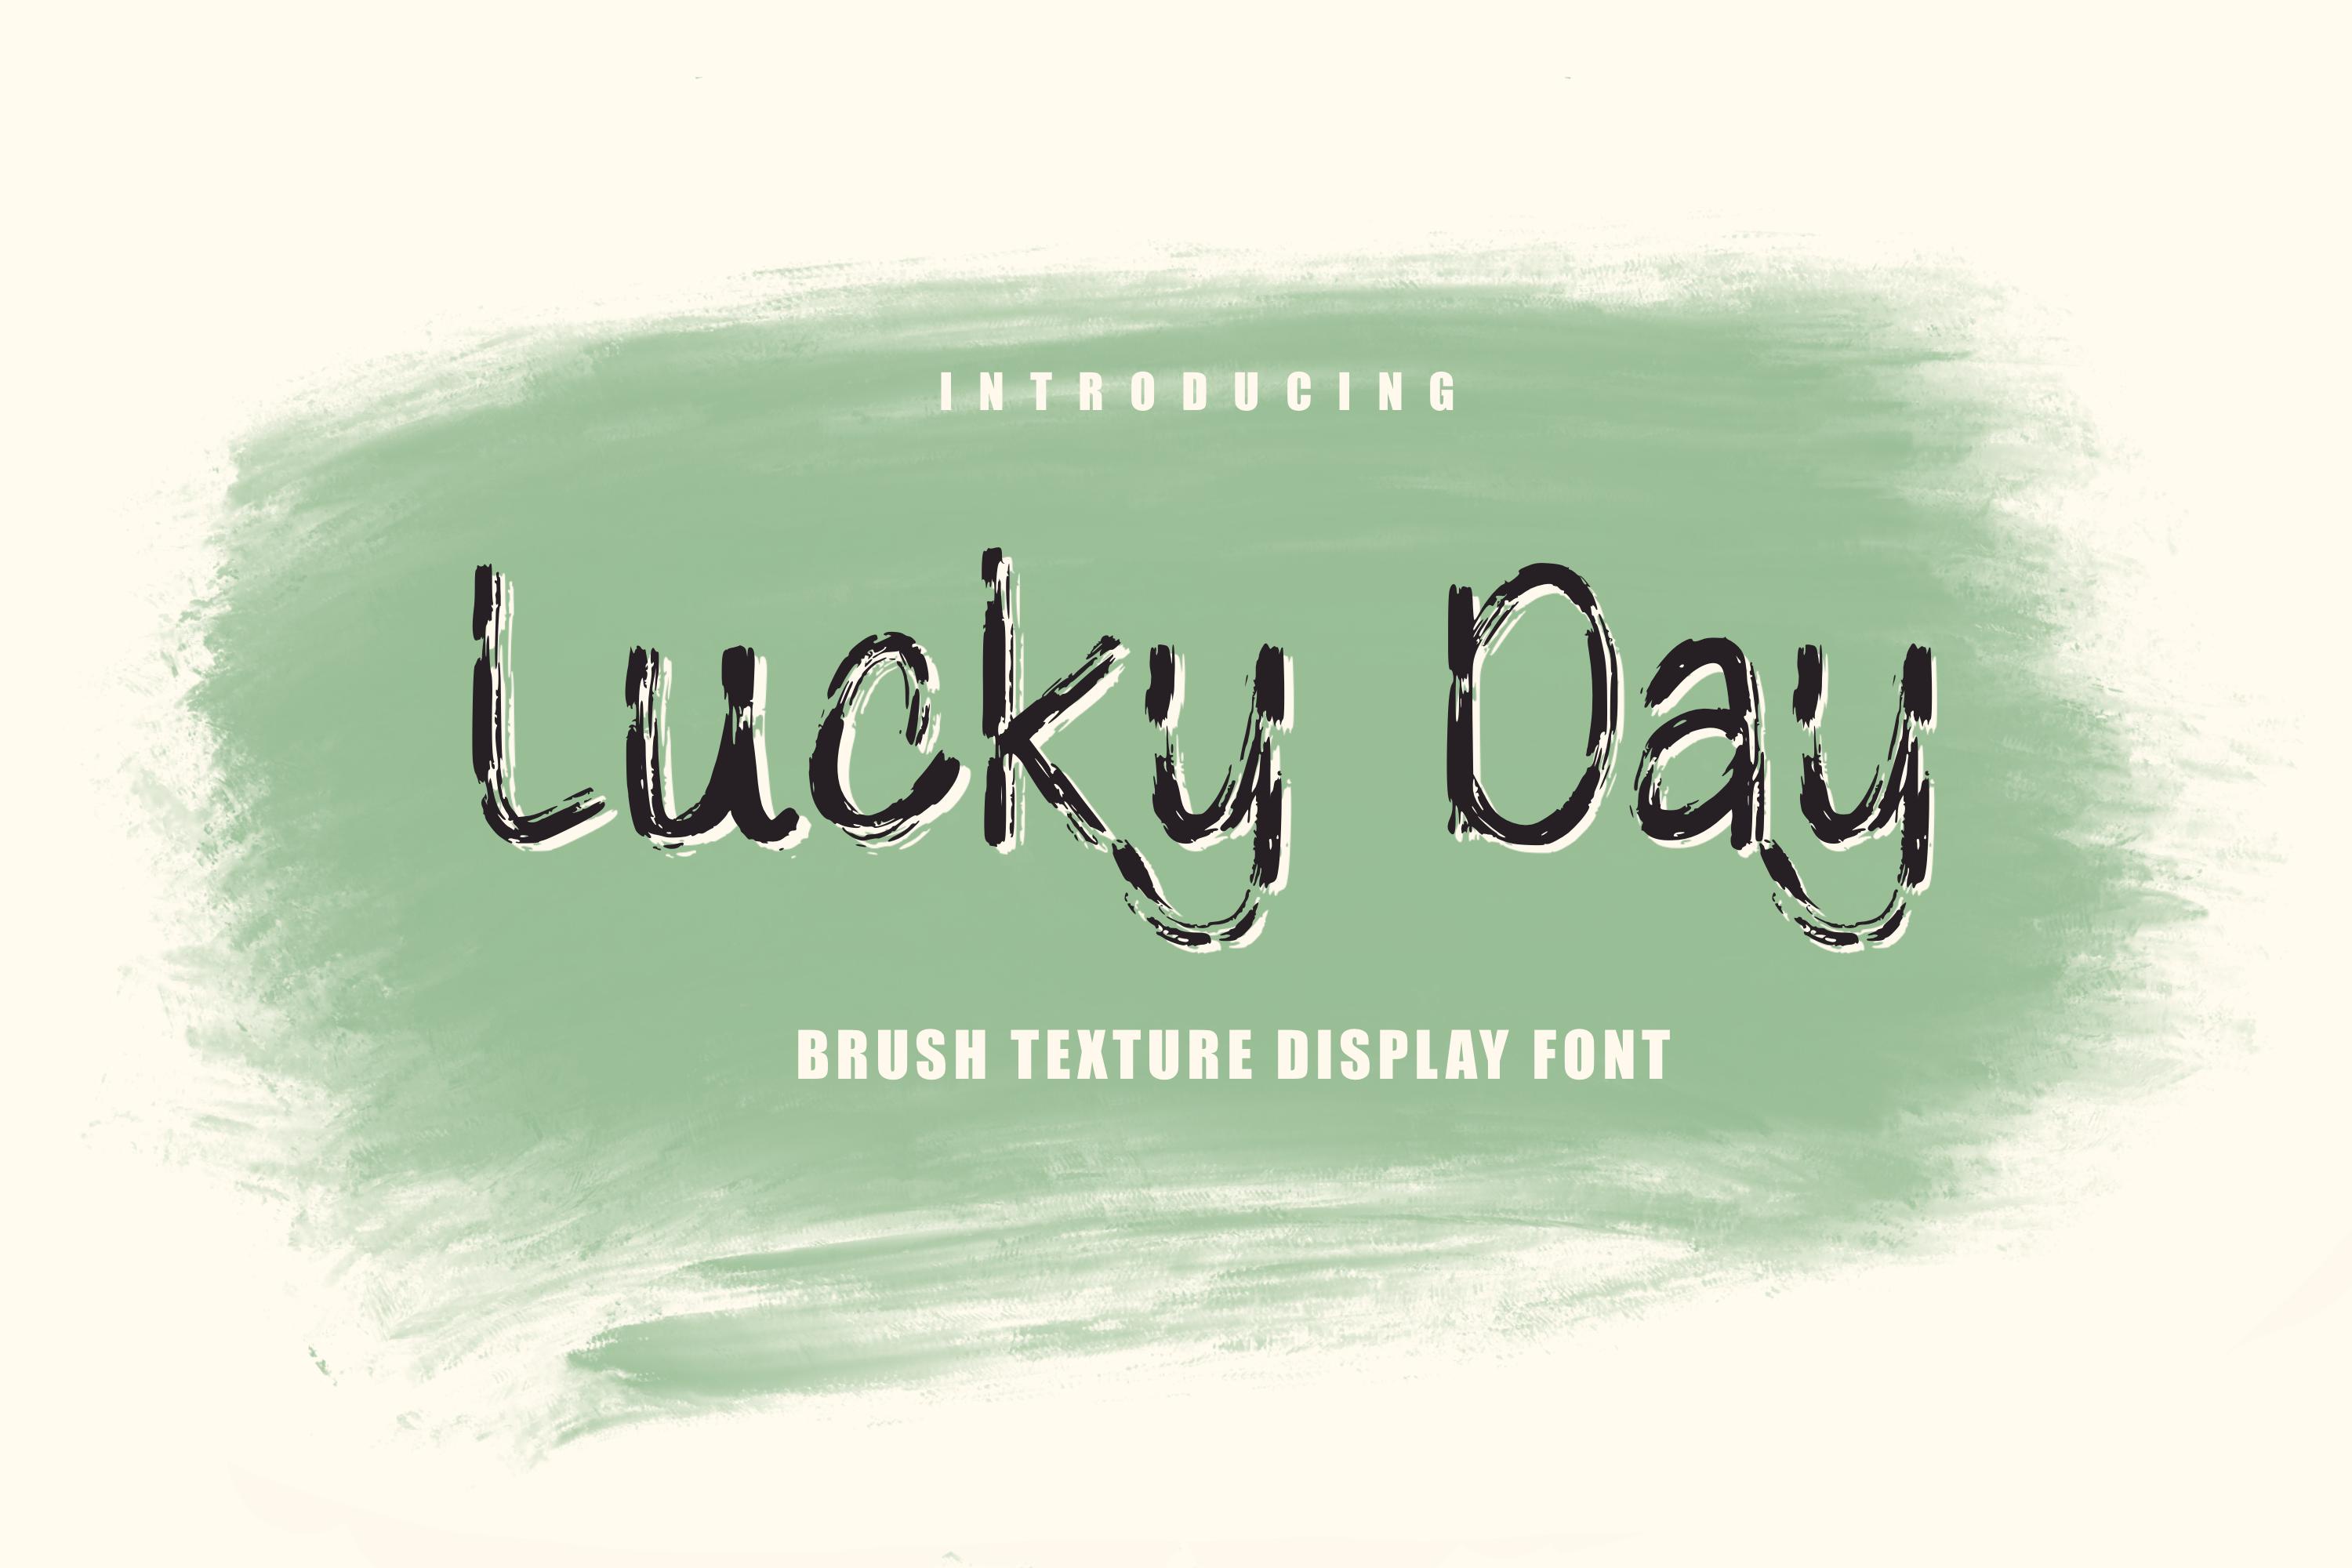 Lucky Day Font